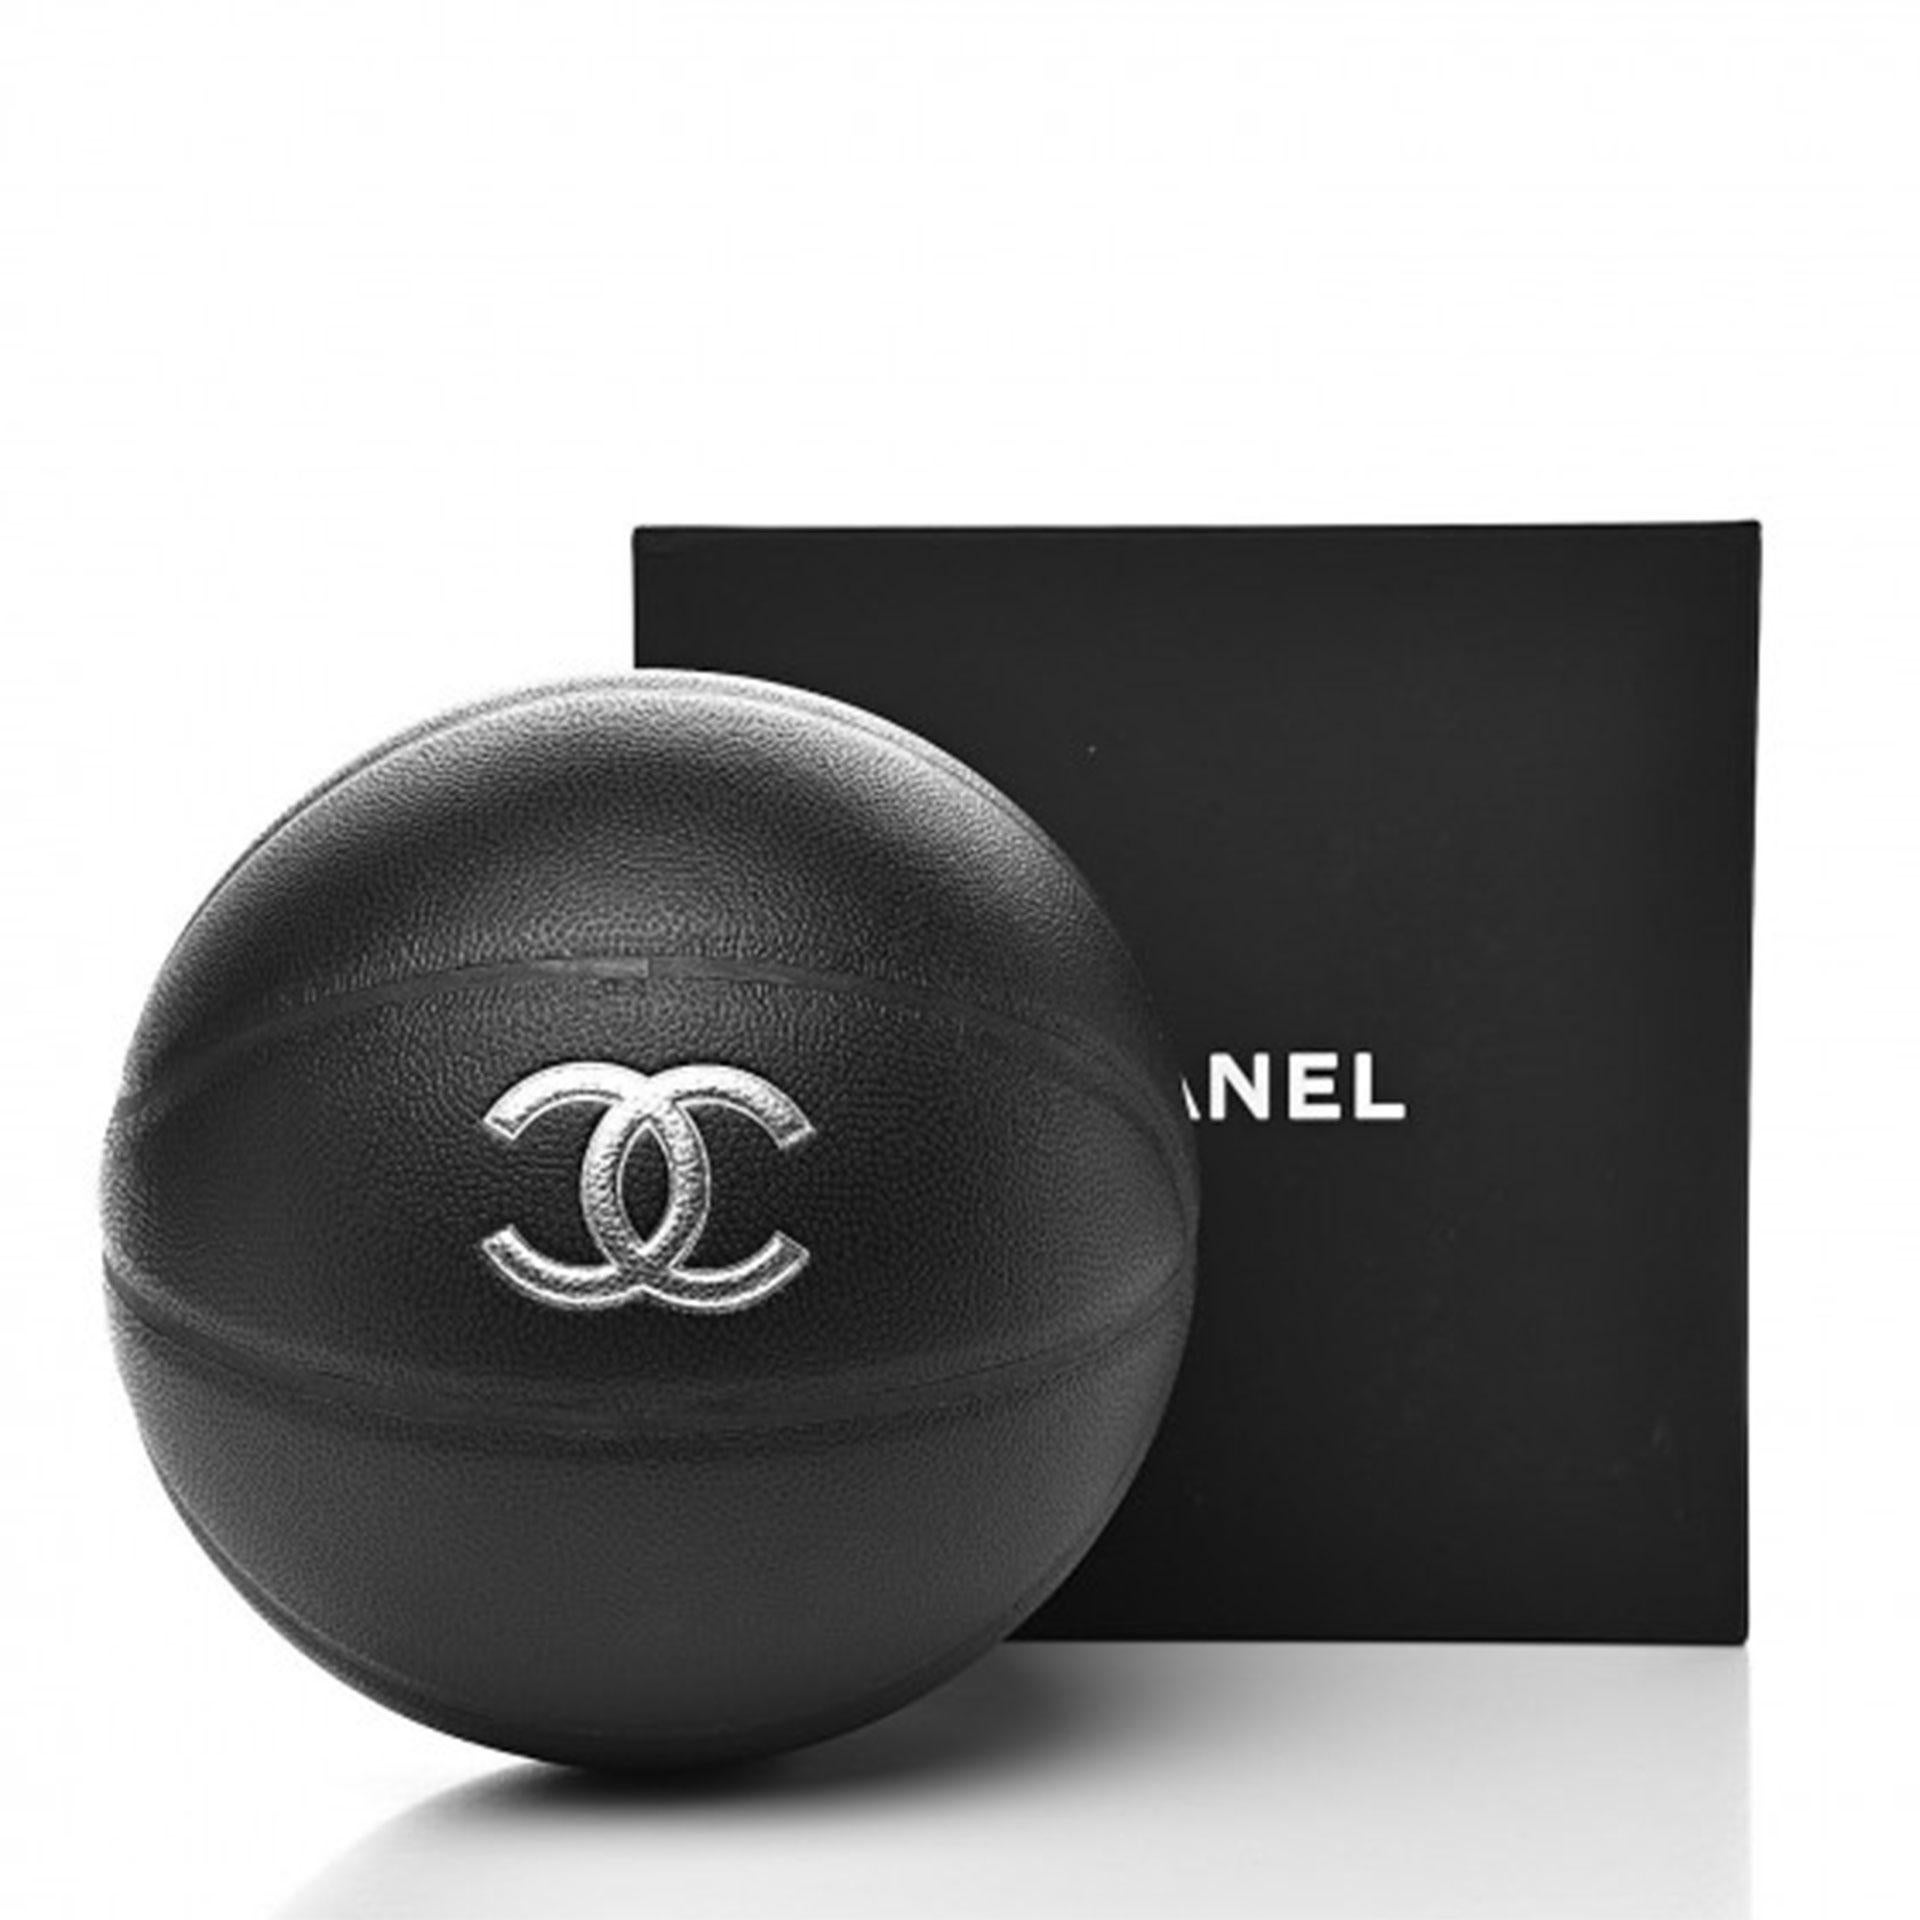 All-black designer basketball is regulation size, with silver Chanel and CC lettering, and includes a lambskin chain net with a strap. 